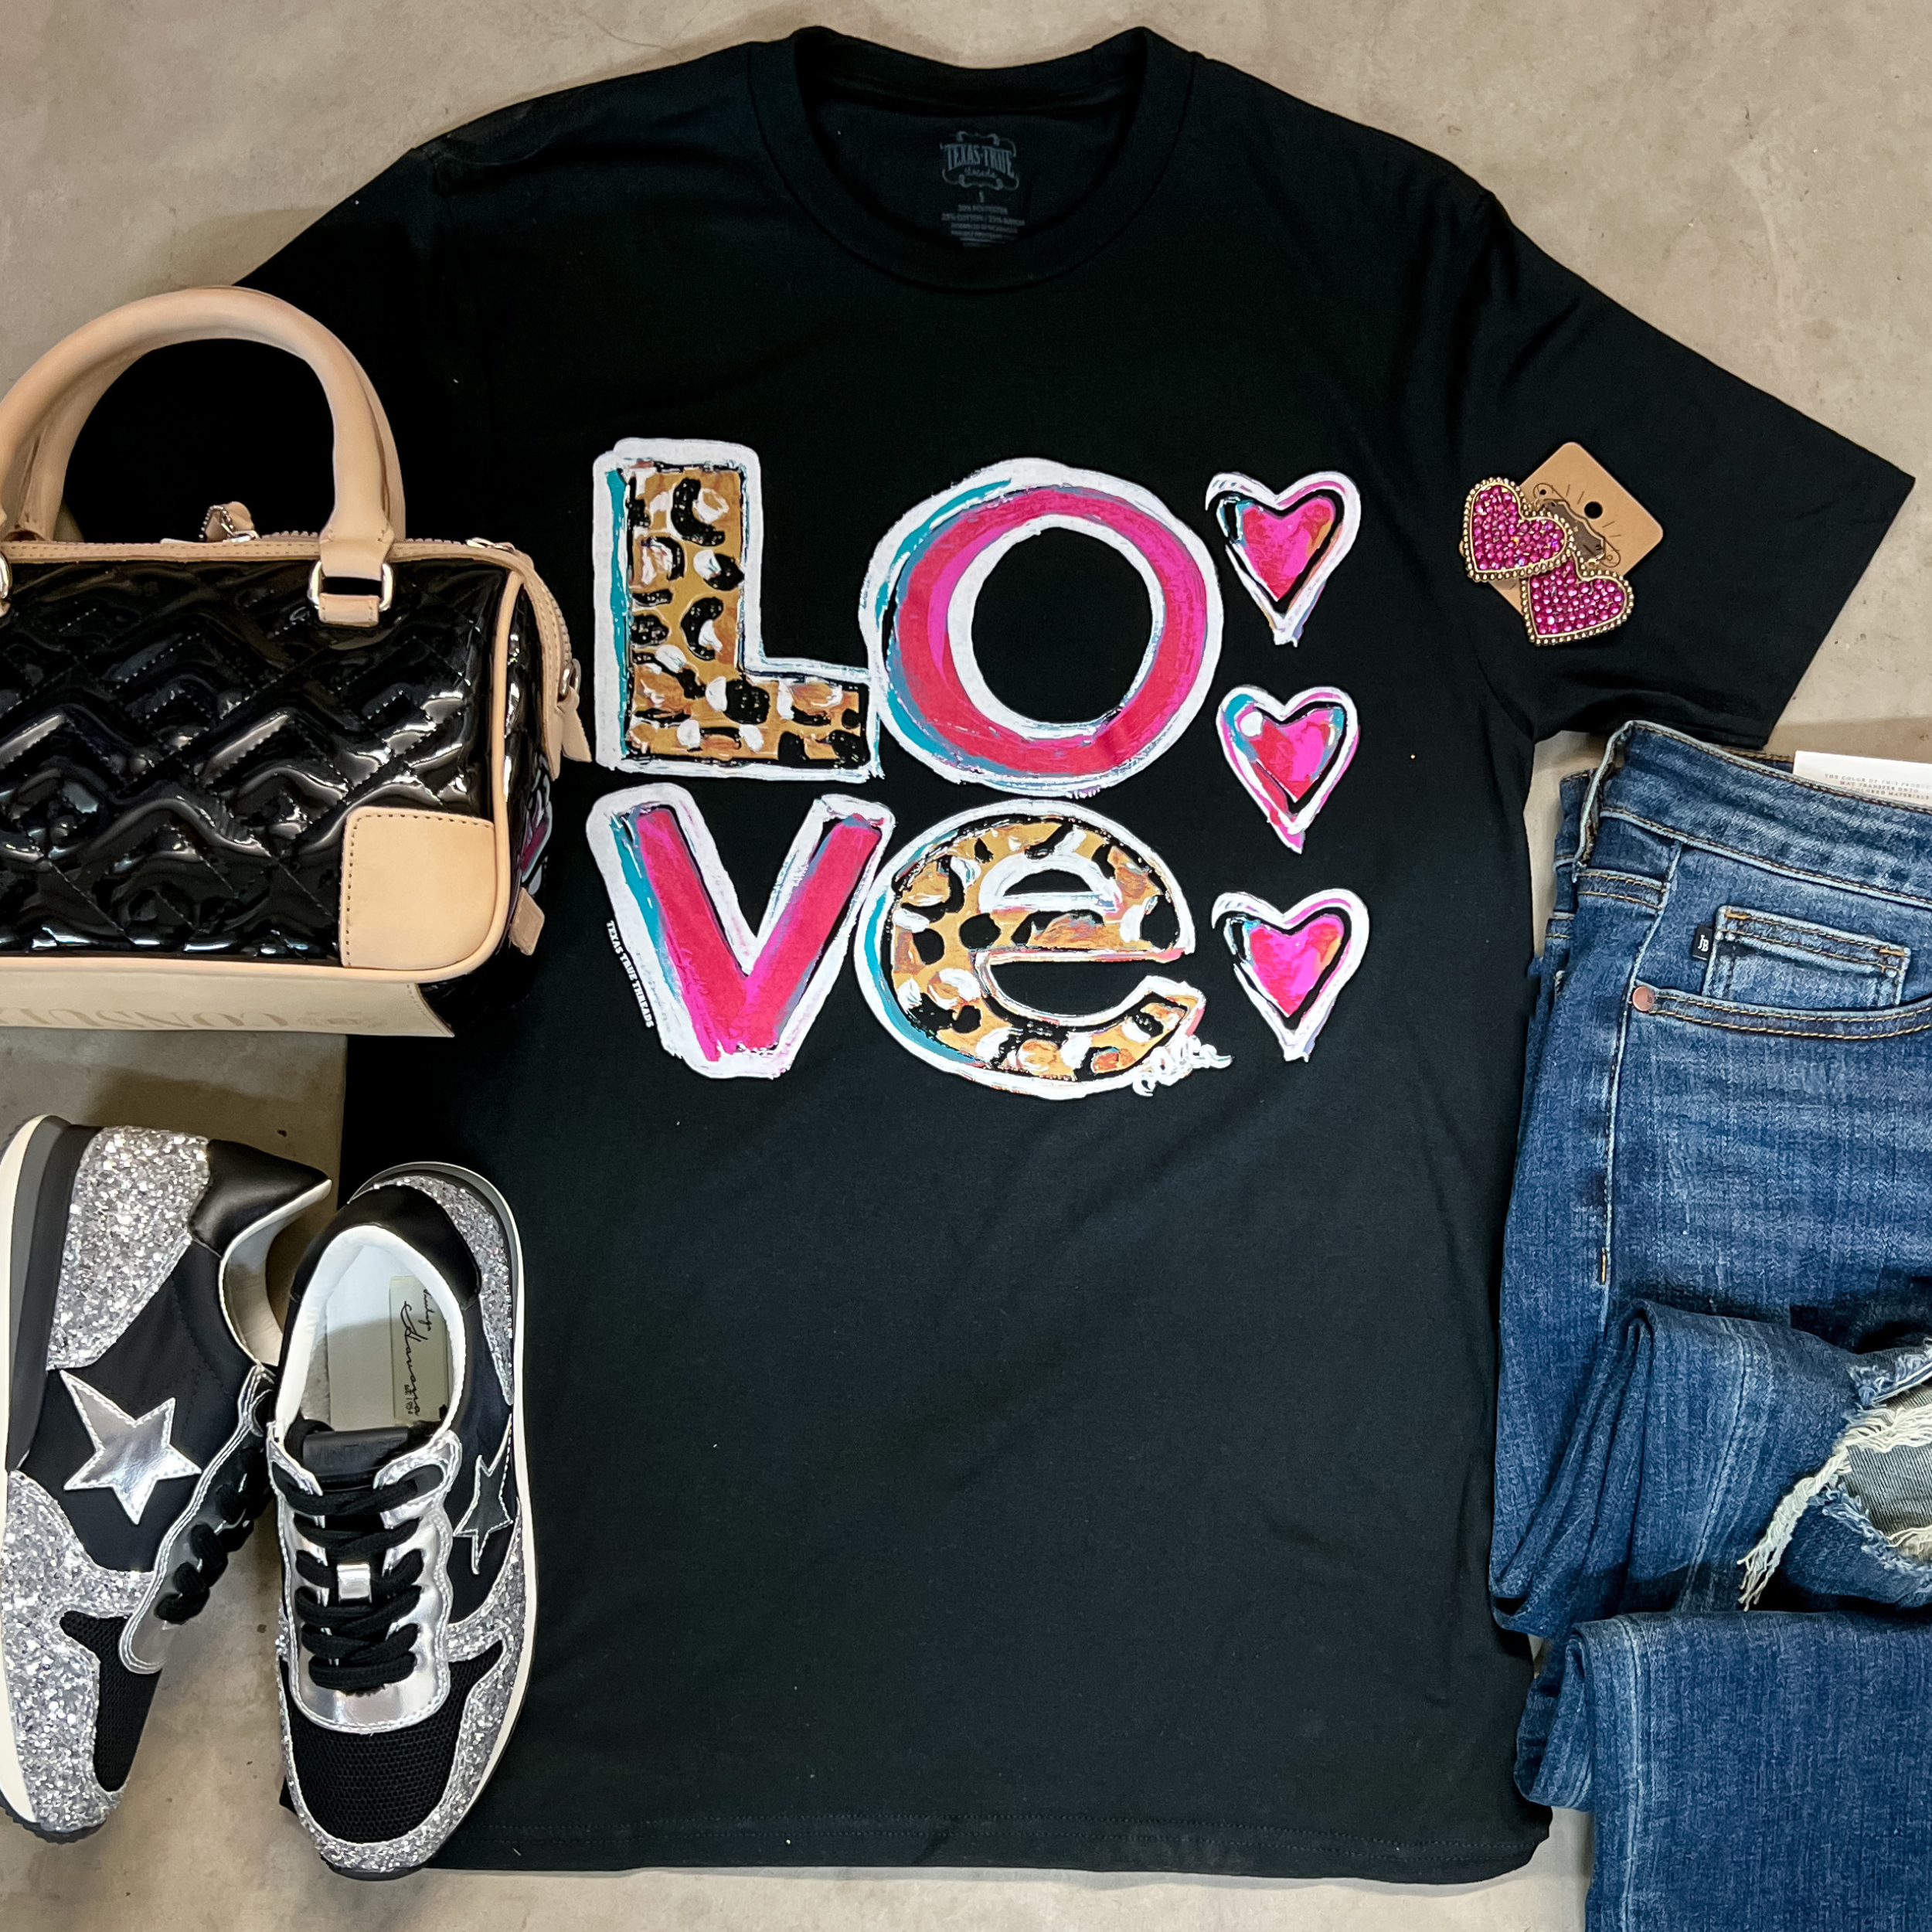 A black tee shirt with short sleeves, a crew neckline, and a graphic that says "LOVE" with pink, blue, and leopard print letters. It is pictured with a black purse, black and silver sneakers, and distressed jeans.